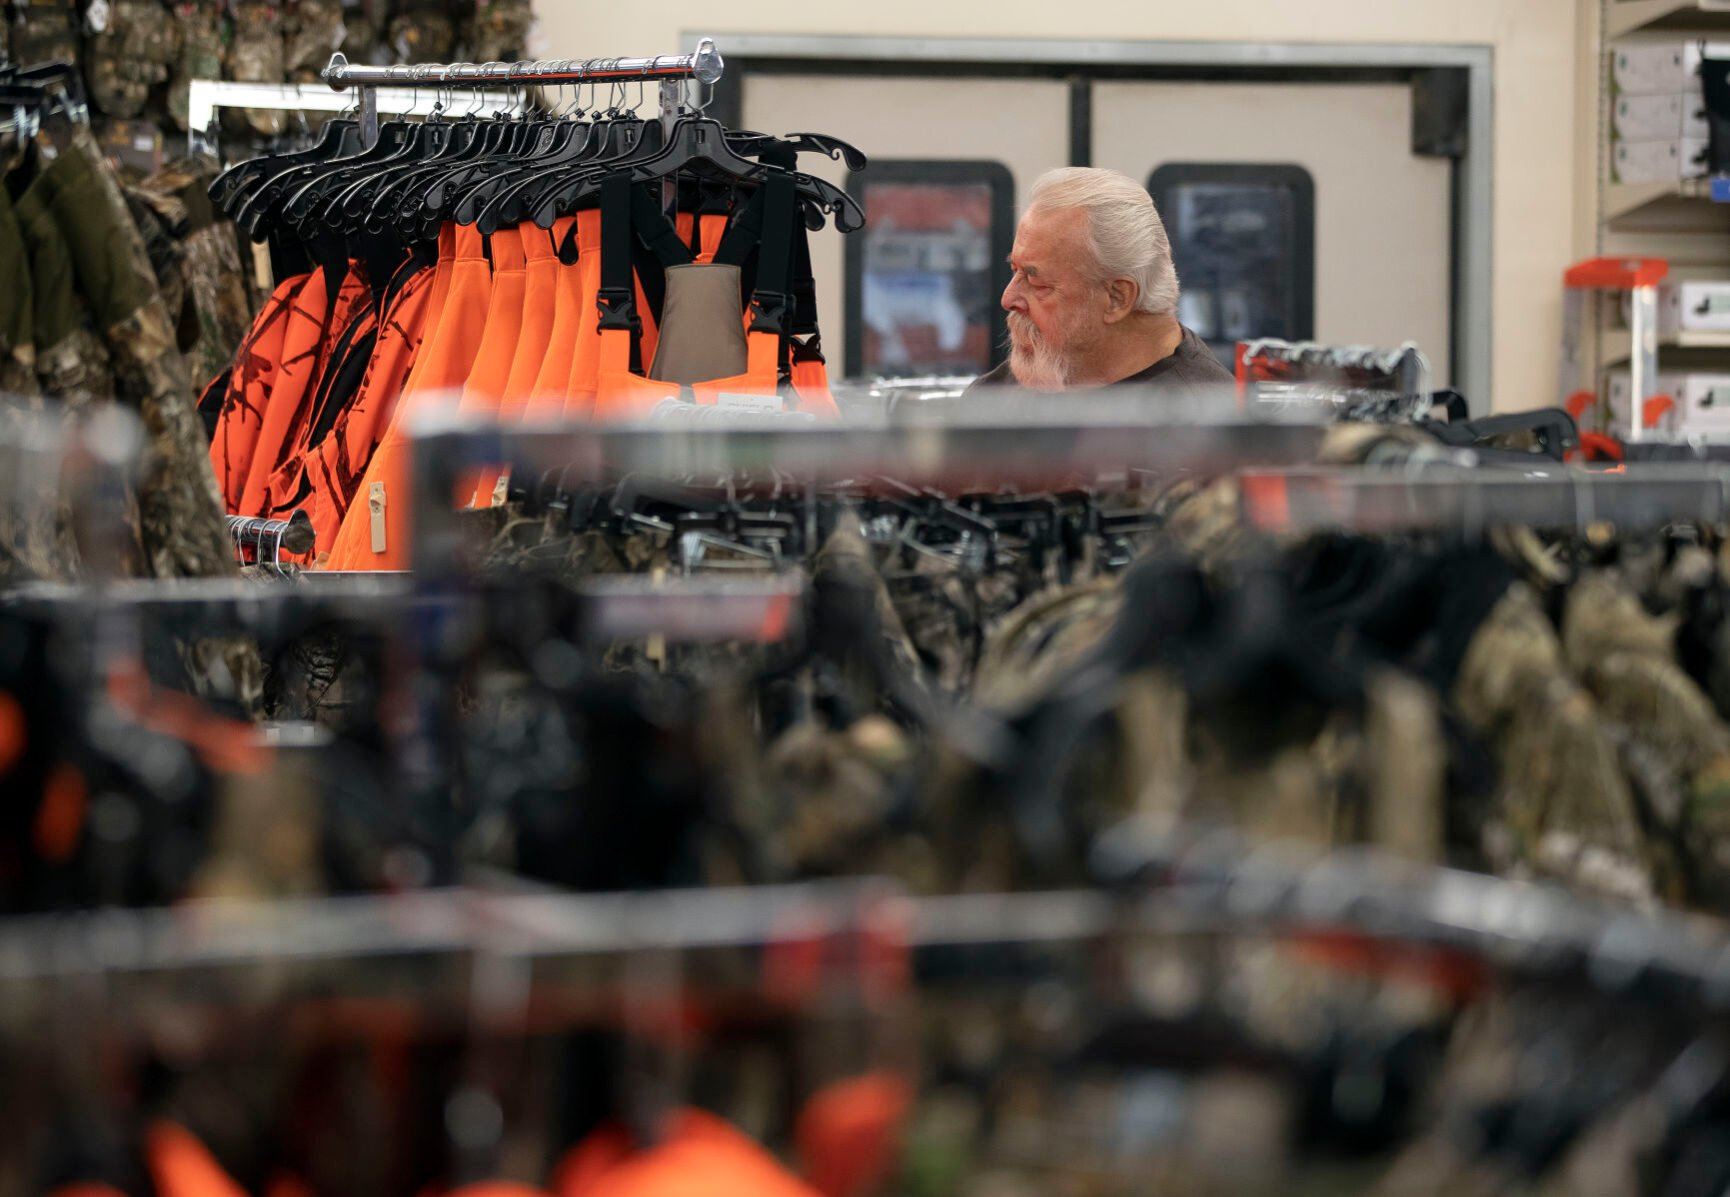 John Binninger, of East Dubuque, Ill., shops for hunting clothing at Theisen